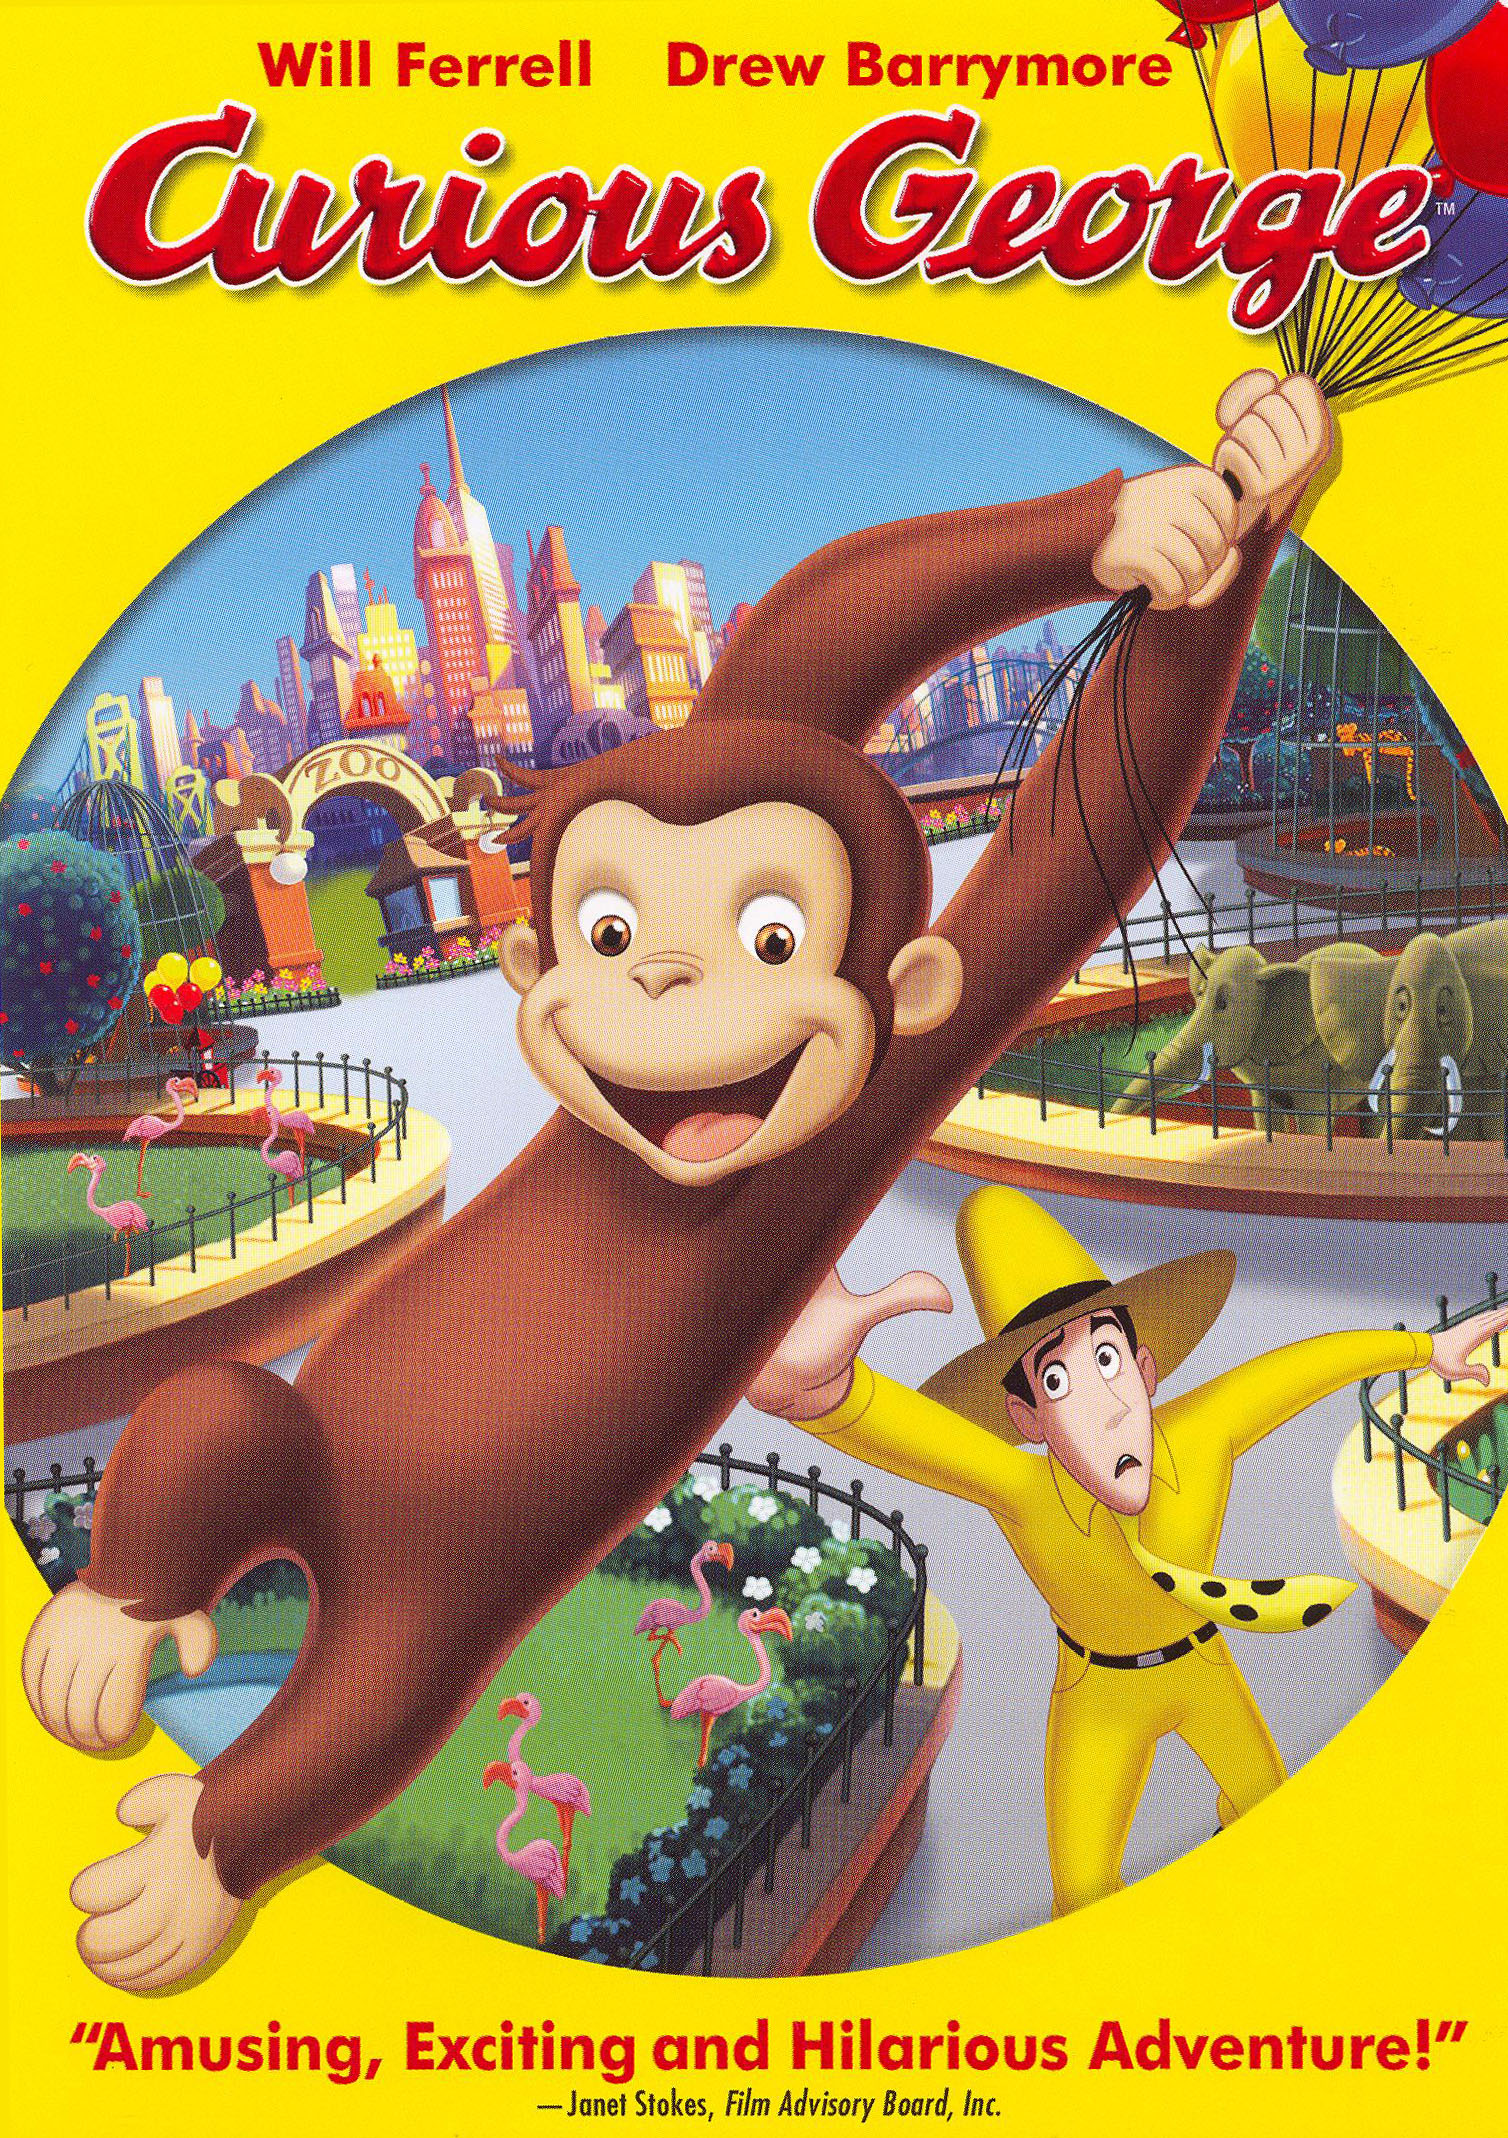 DVD REVIEW: “Curious George 3: Back to the Jungle”